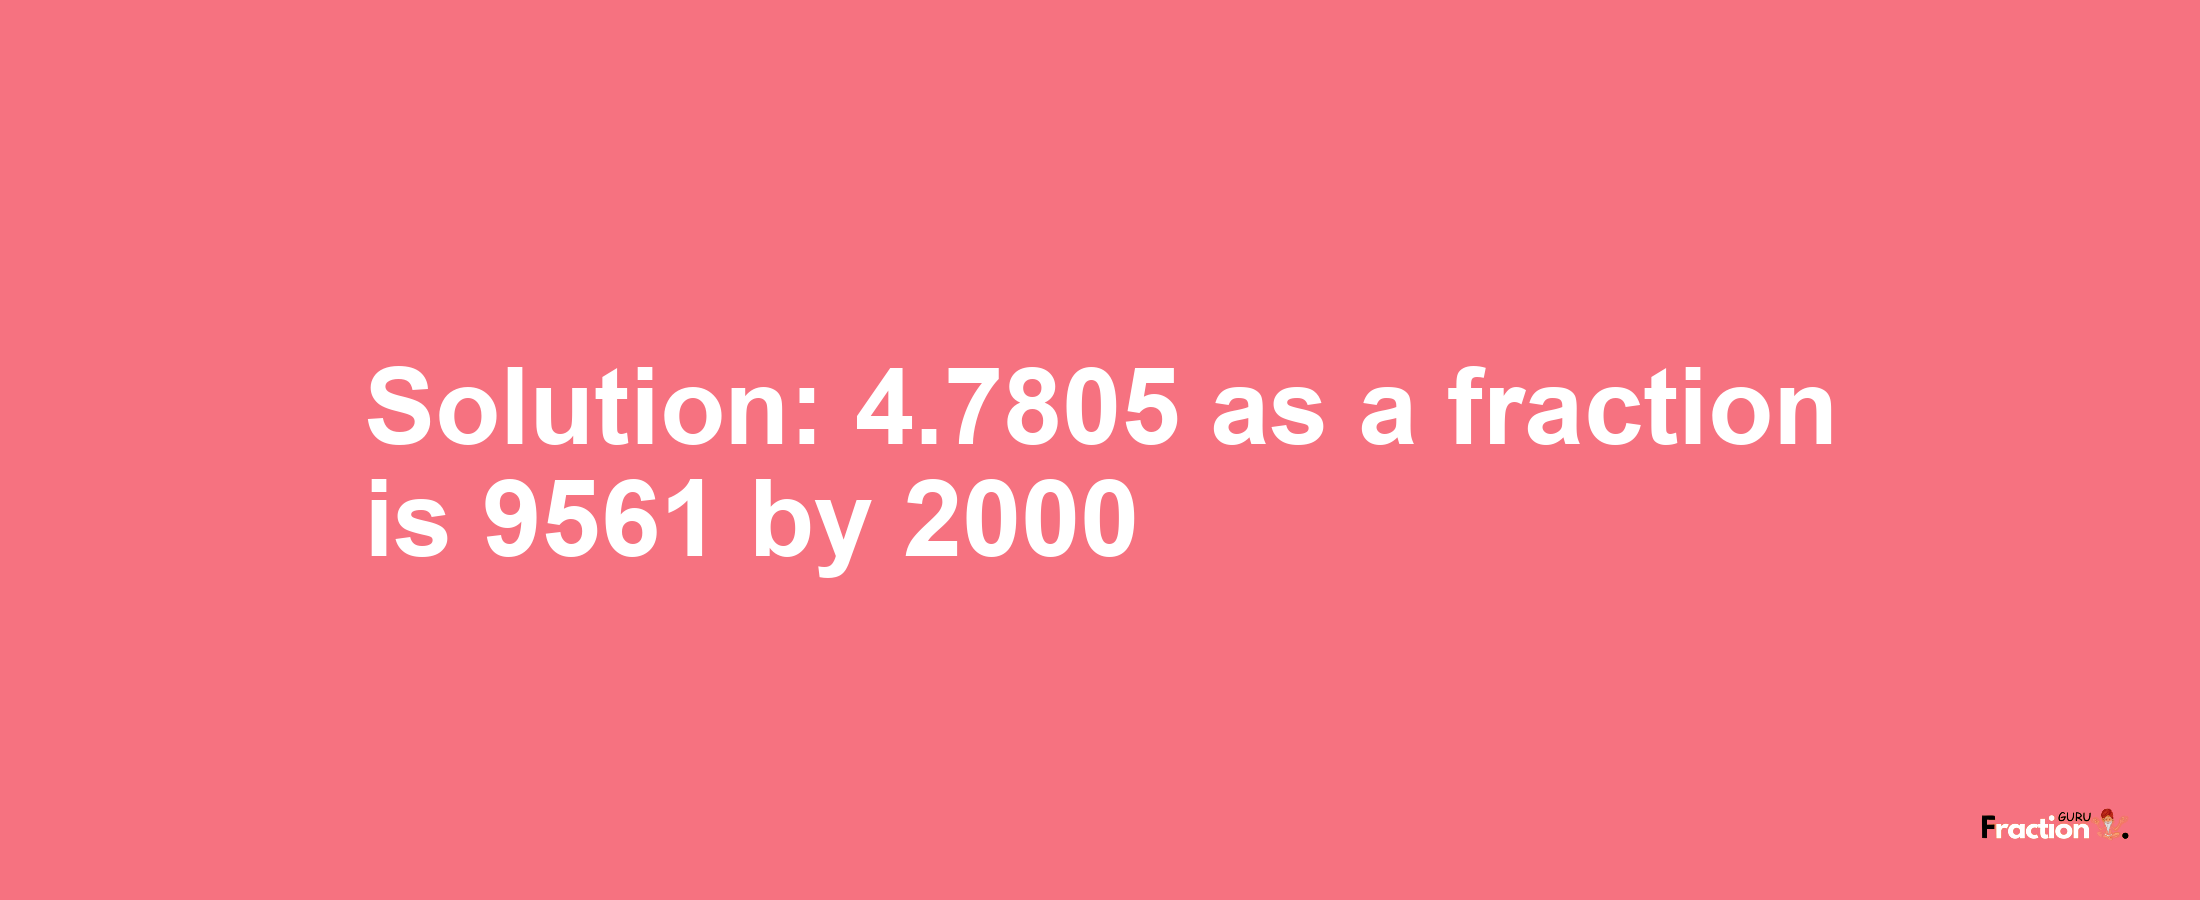 Solution:4.7805 as a fraction is 9561/2000